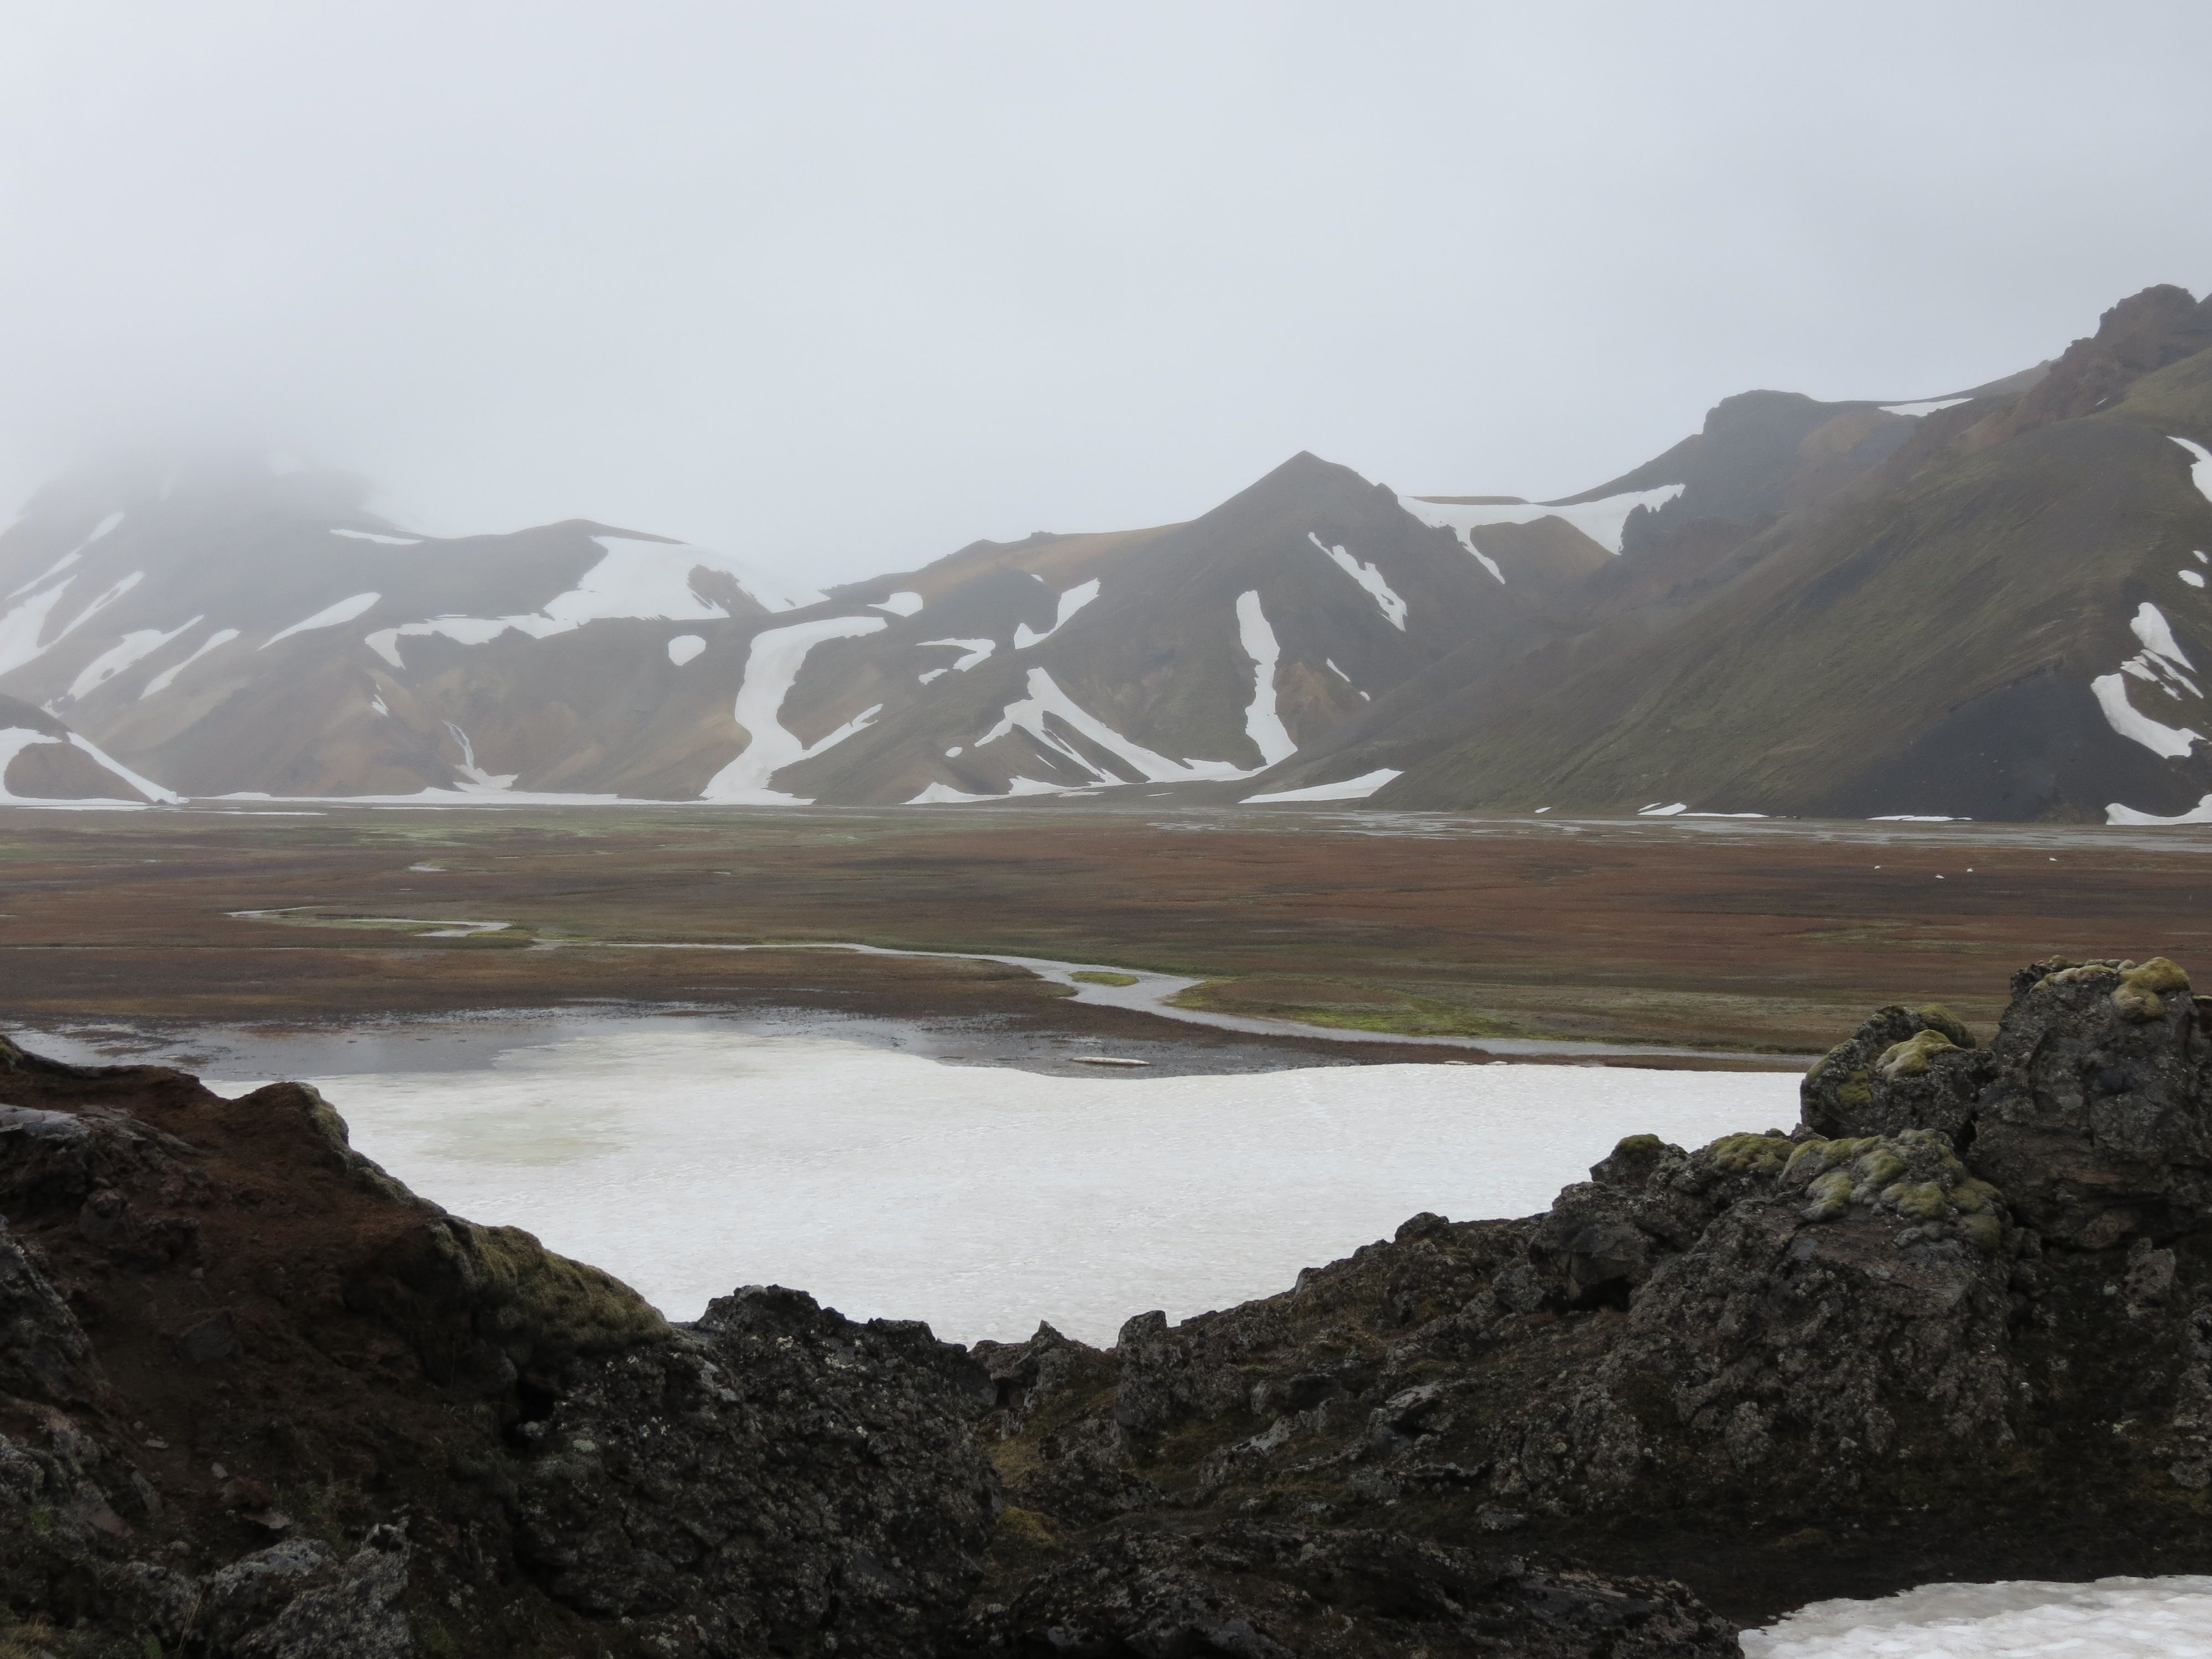 Snowfield and mountains